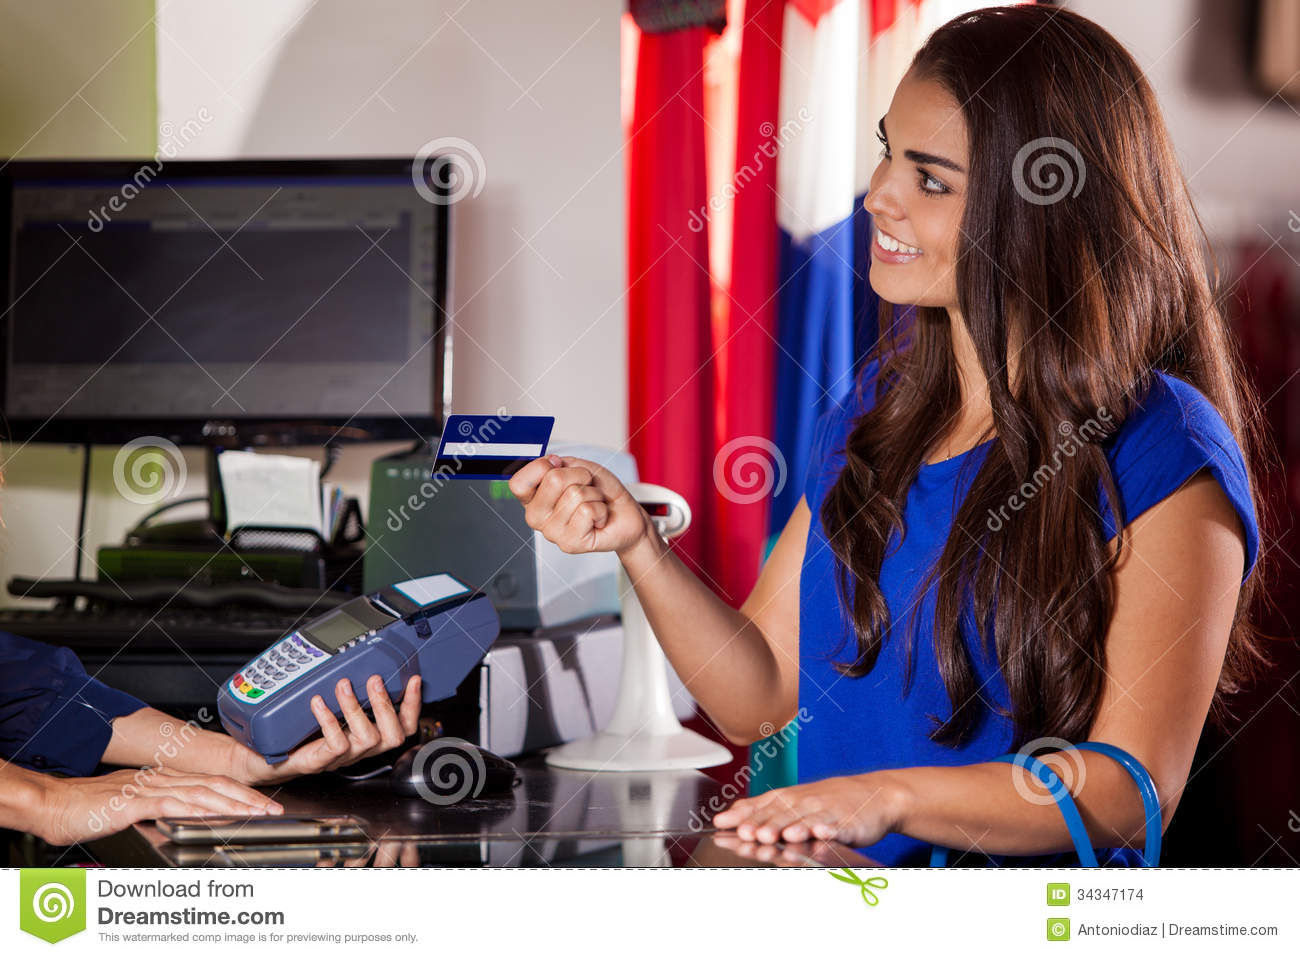 Paying At A Cash Register Stock Images   Image  34347174